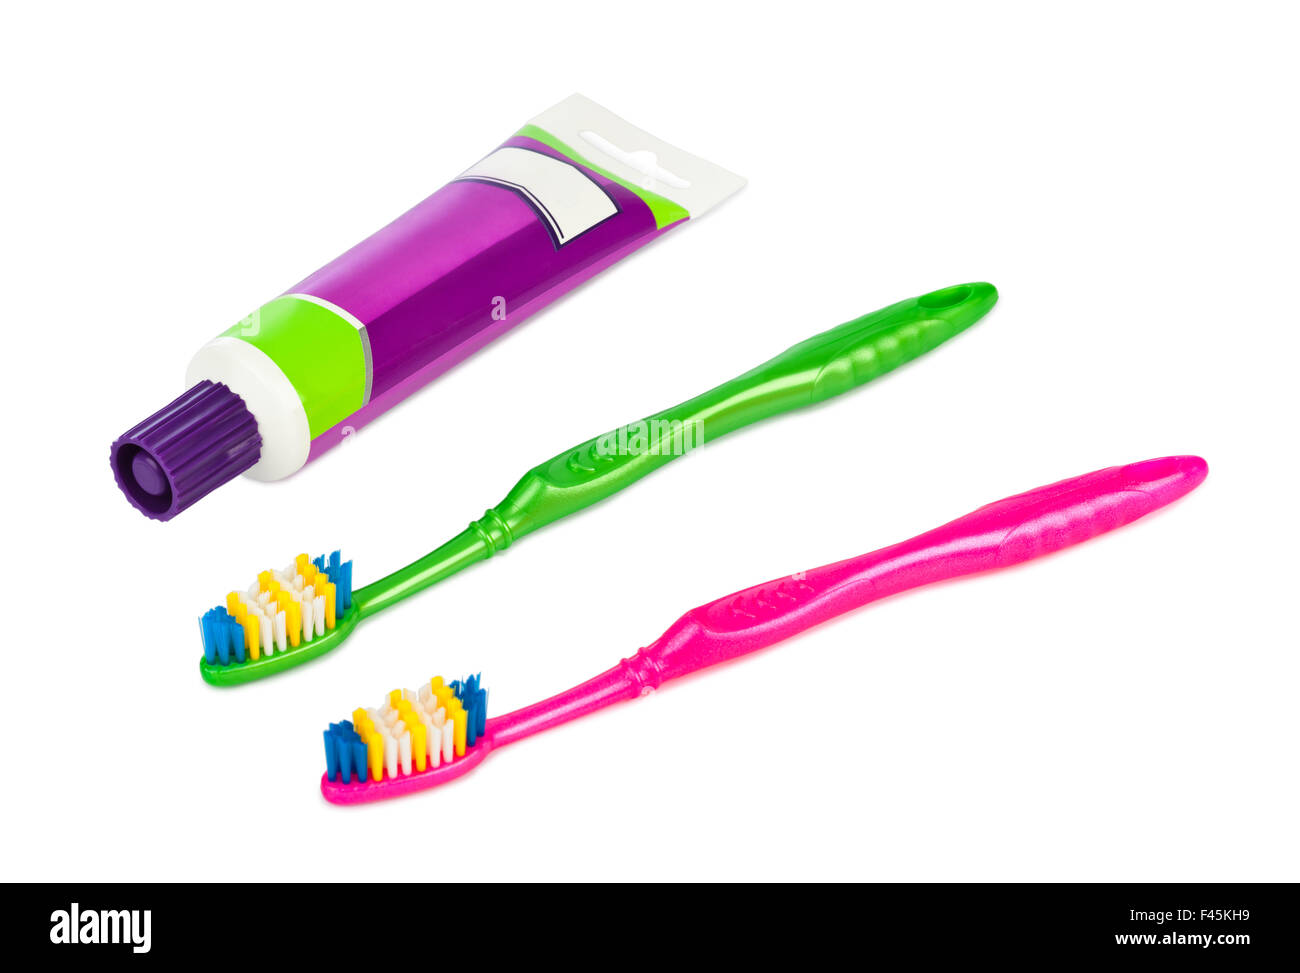 Toothbrushes and paste tube Stock Photo